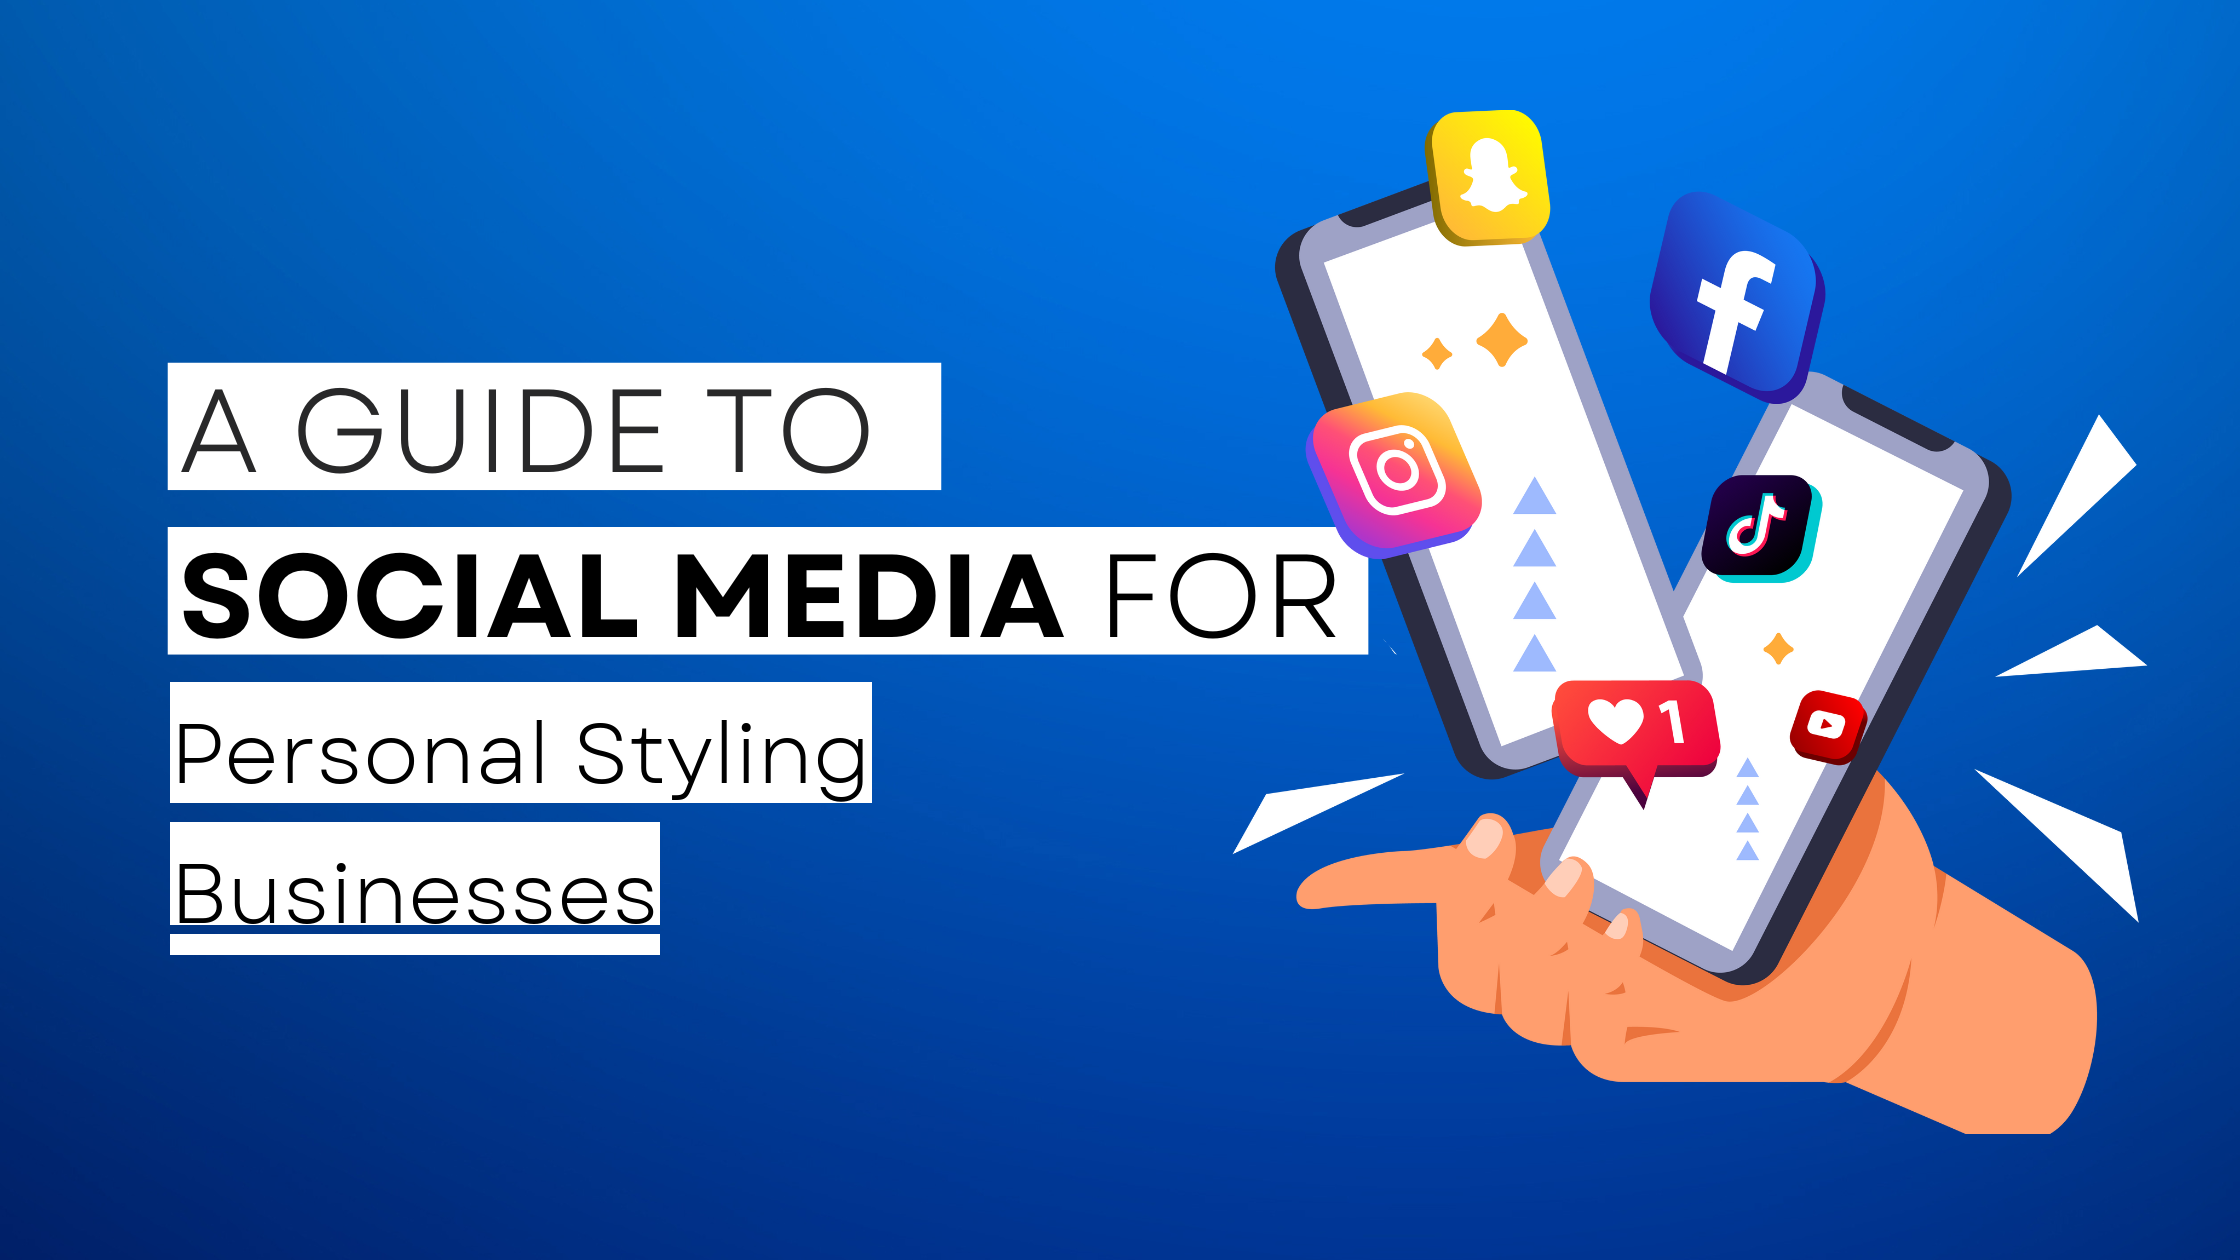 How to start Personal Styling  on social media